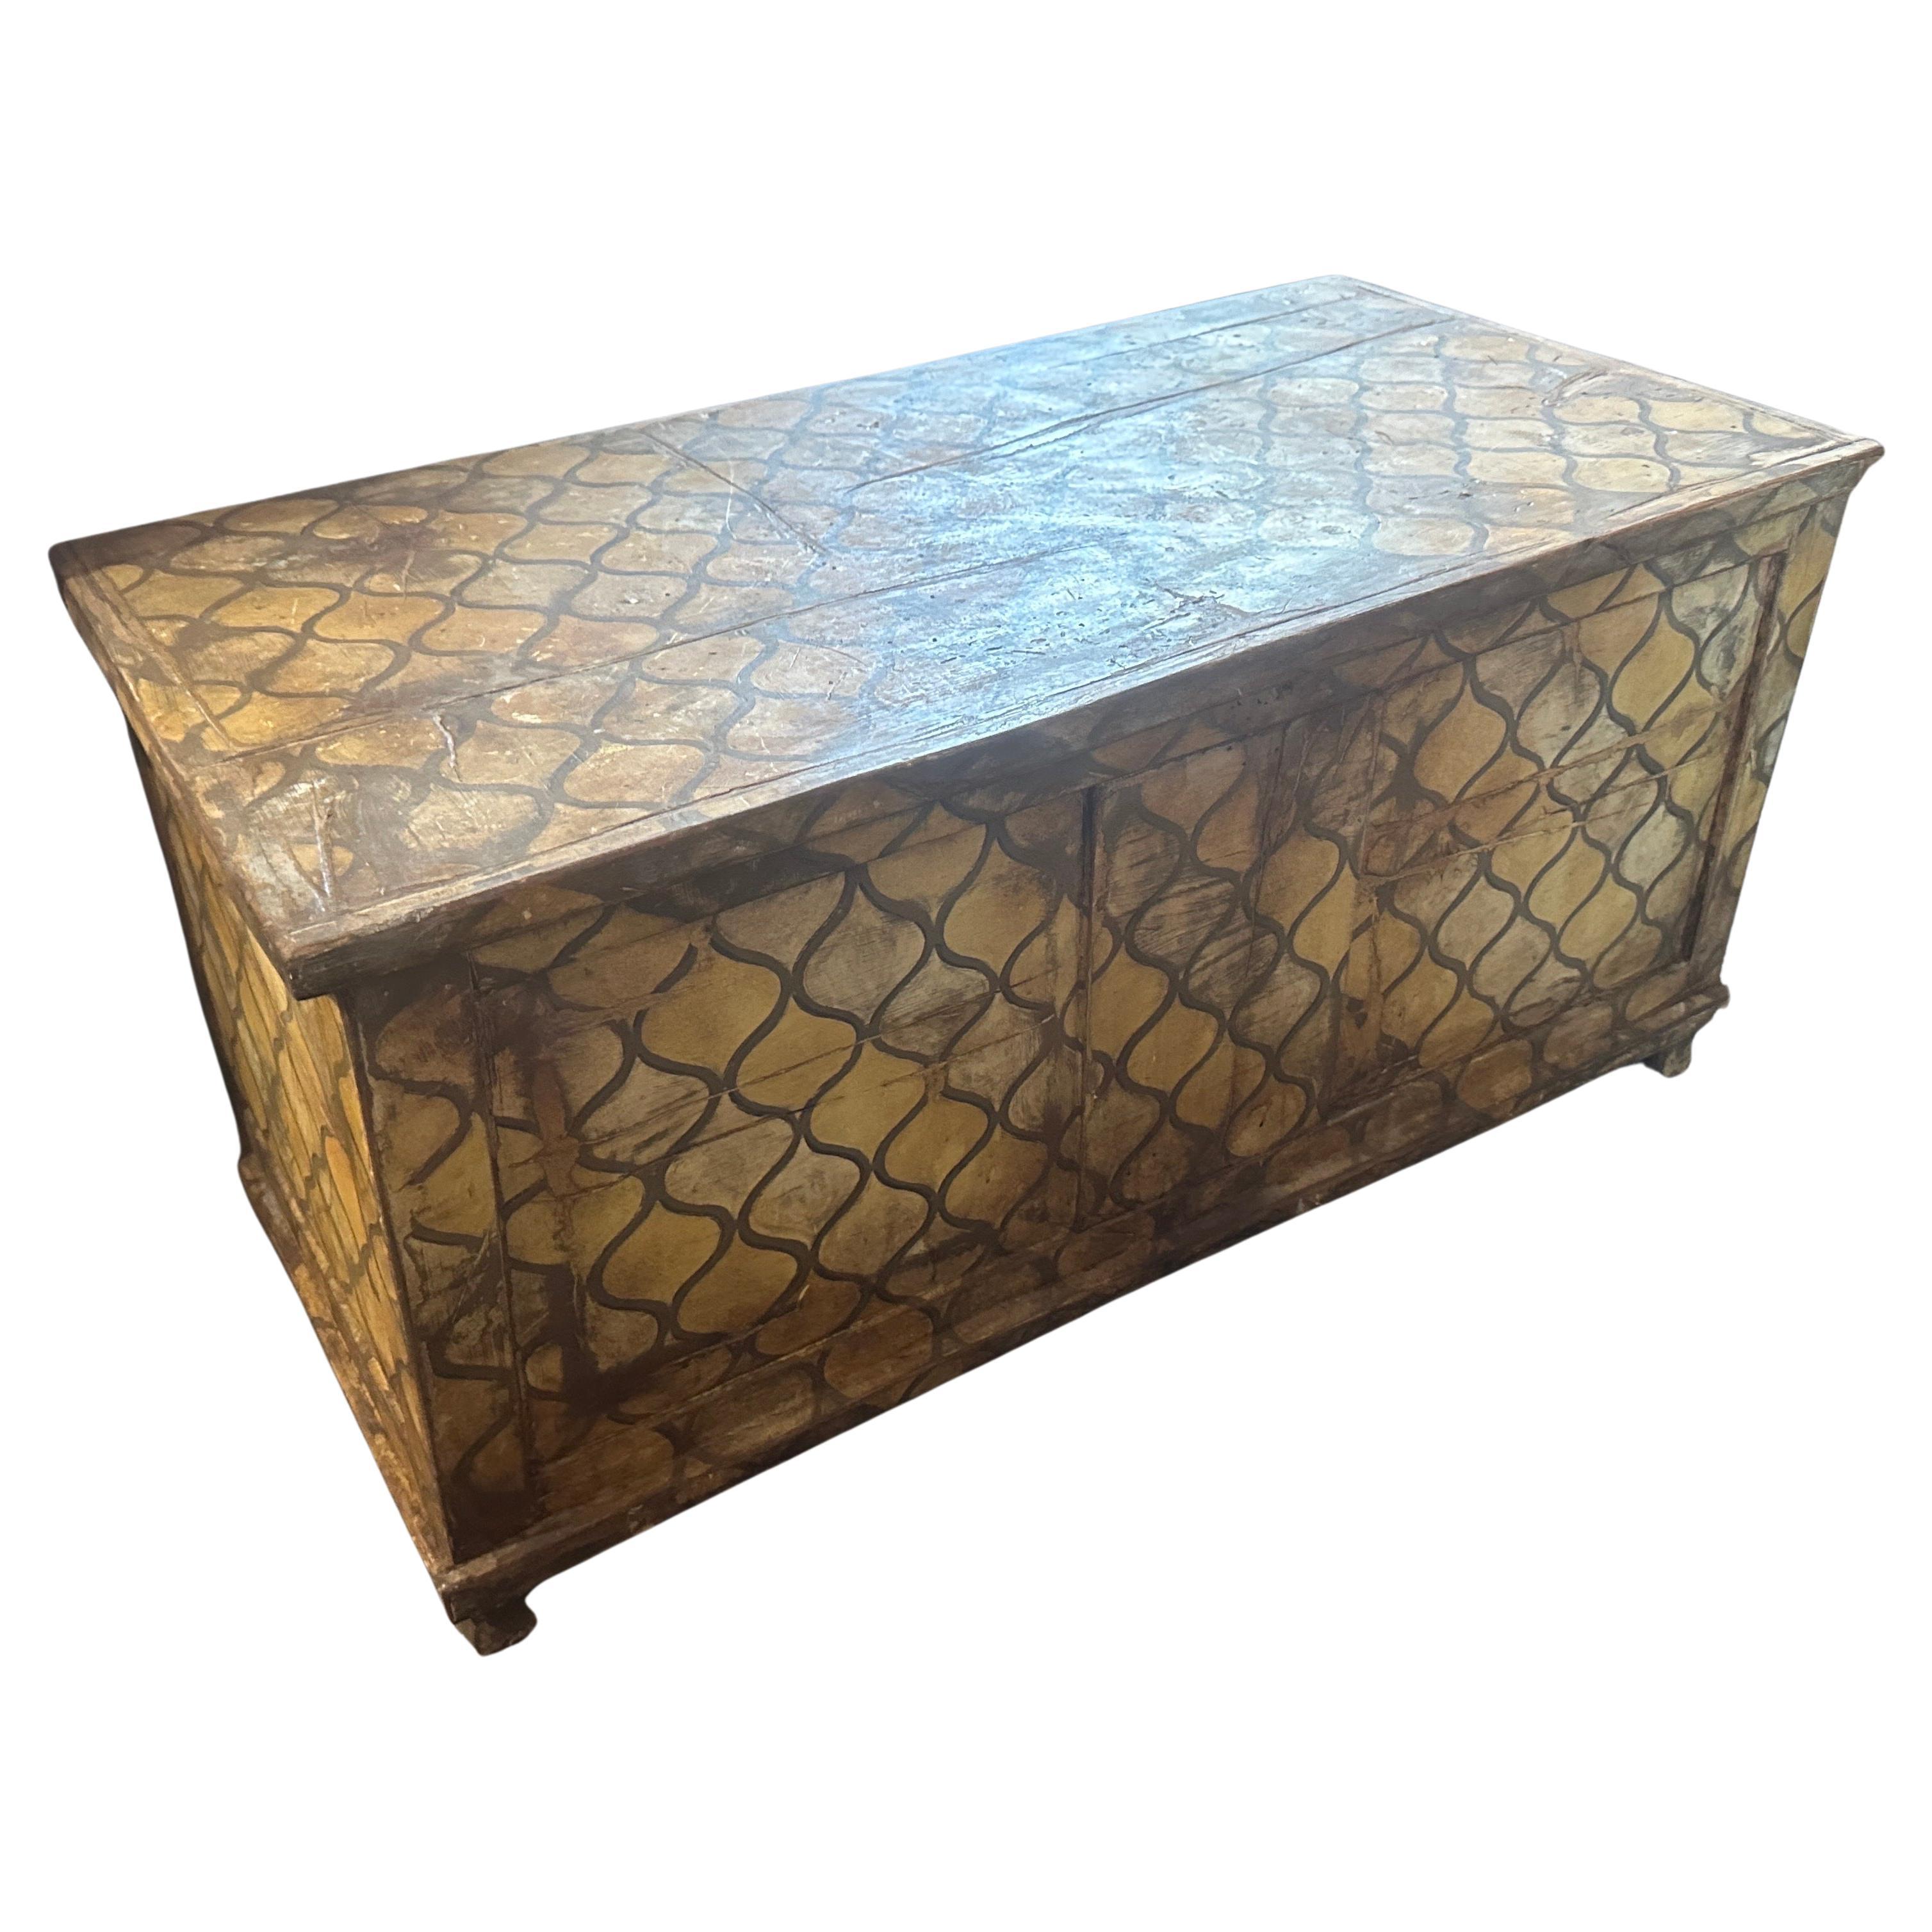 A 19th Century Sicilian Wedding Blanket Chest is a beautiful and historically rich piece of furniture with specific design features and cultural significance. The Wedding Blanket Chests have been traditionally used in Sicilian weddings. These chests